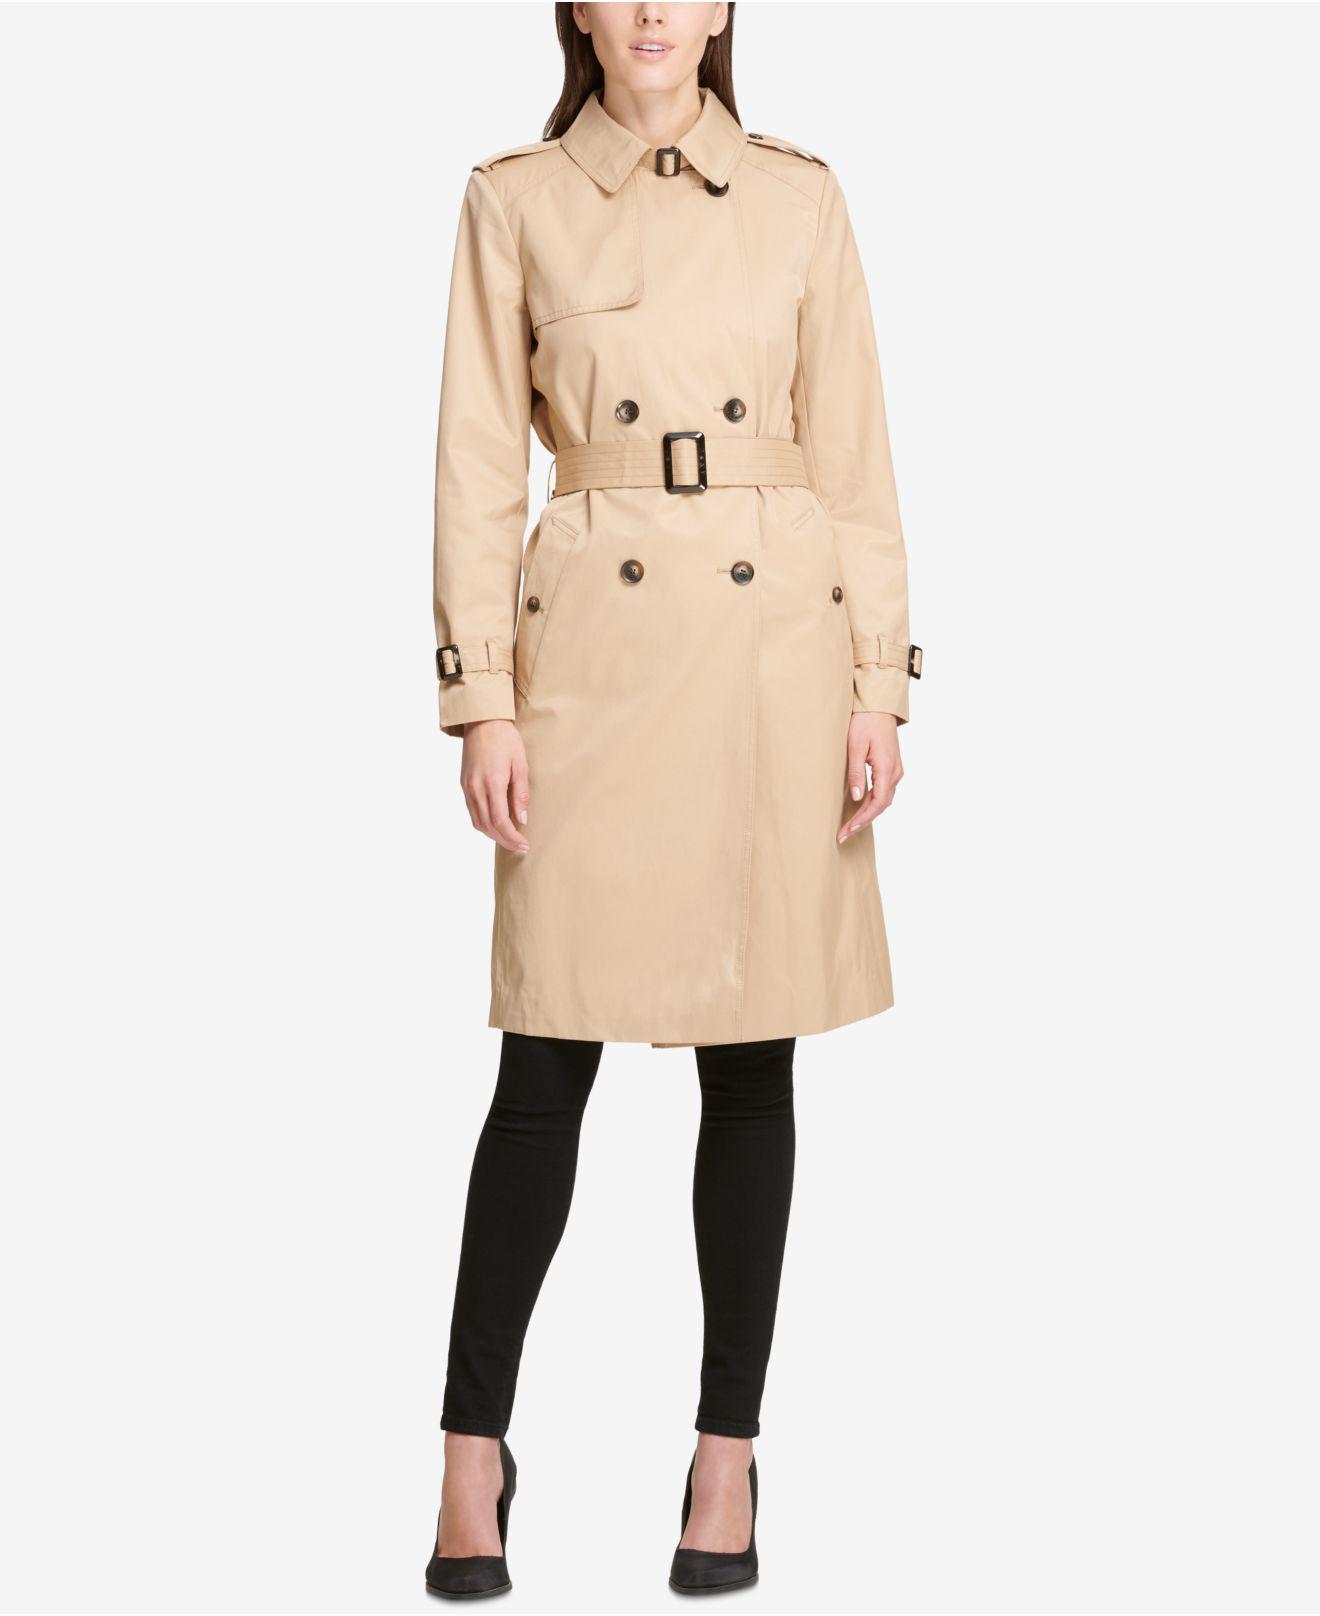  YCZDG Women Solid Color Double Breasted Trench Coat